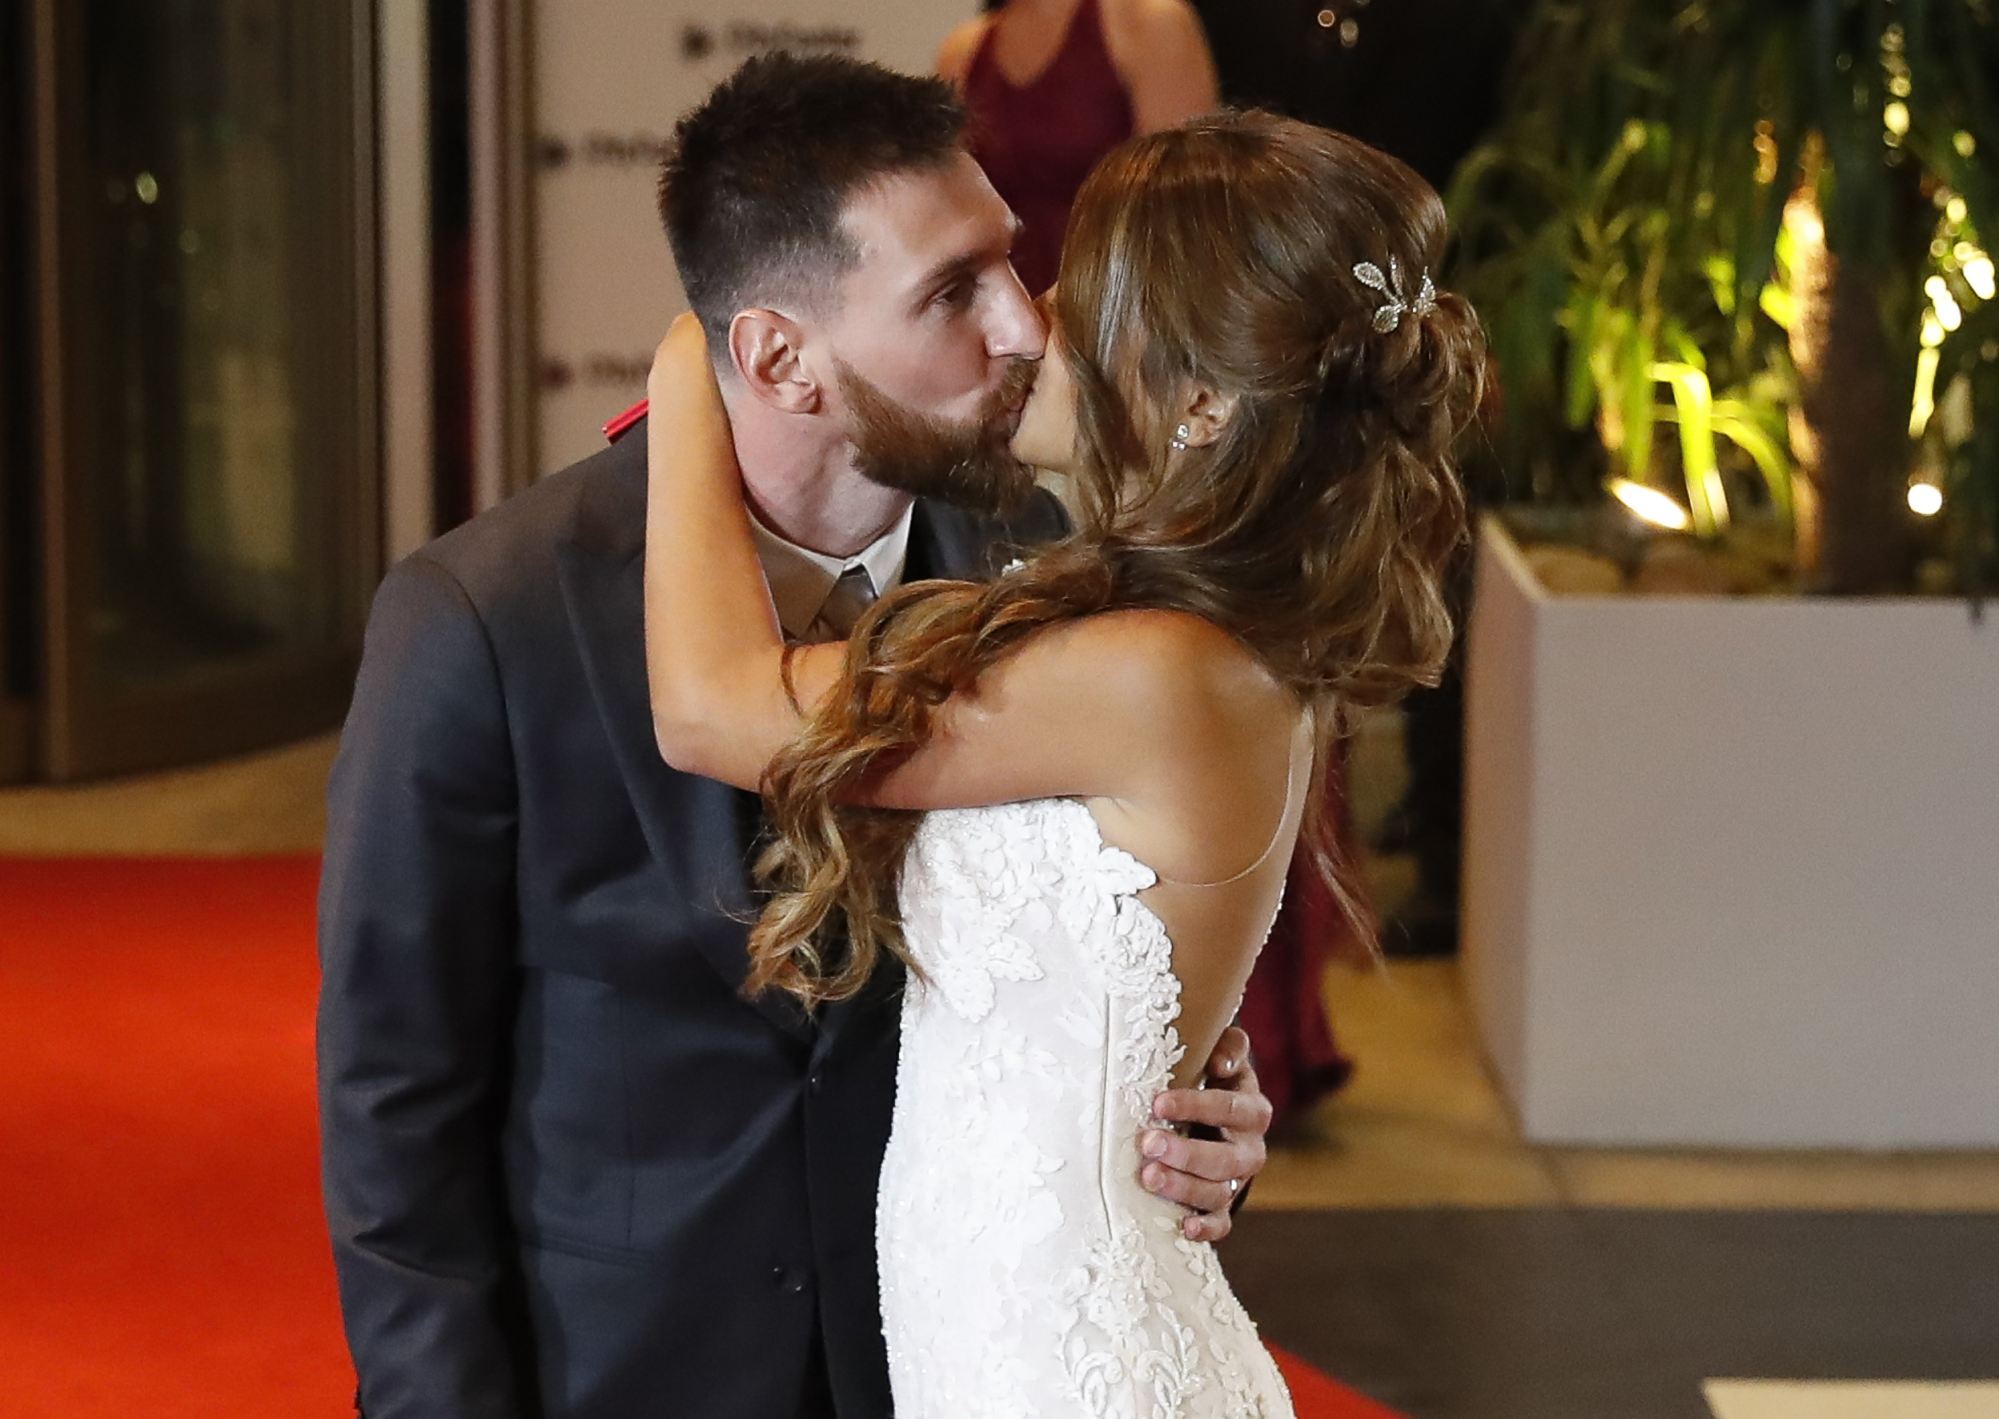 From a fairy tale romance to an OTT wedding, Lionel Messi and Antonela Roccuzzo finally tied the knot in 2017. Photo: EPA